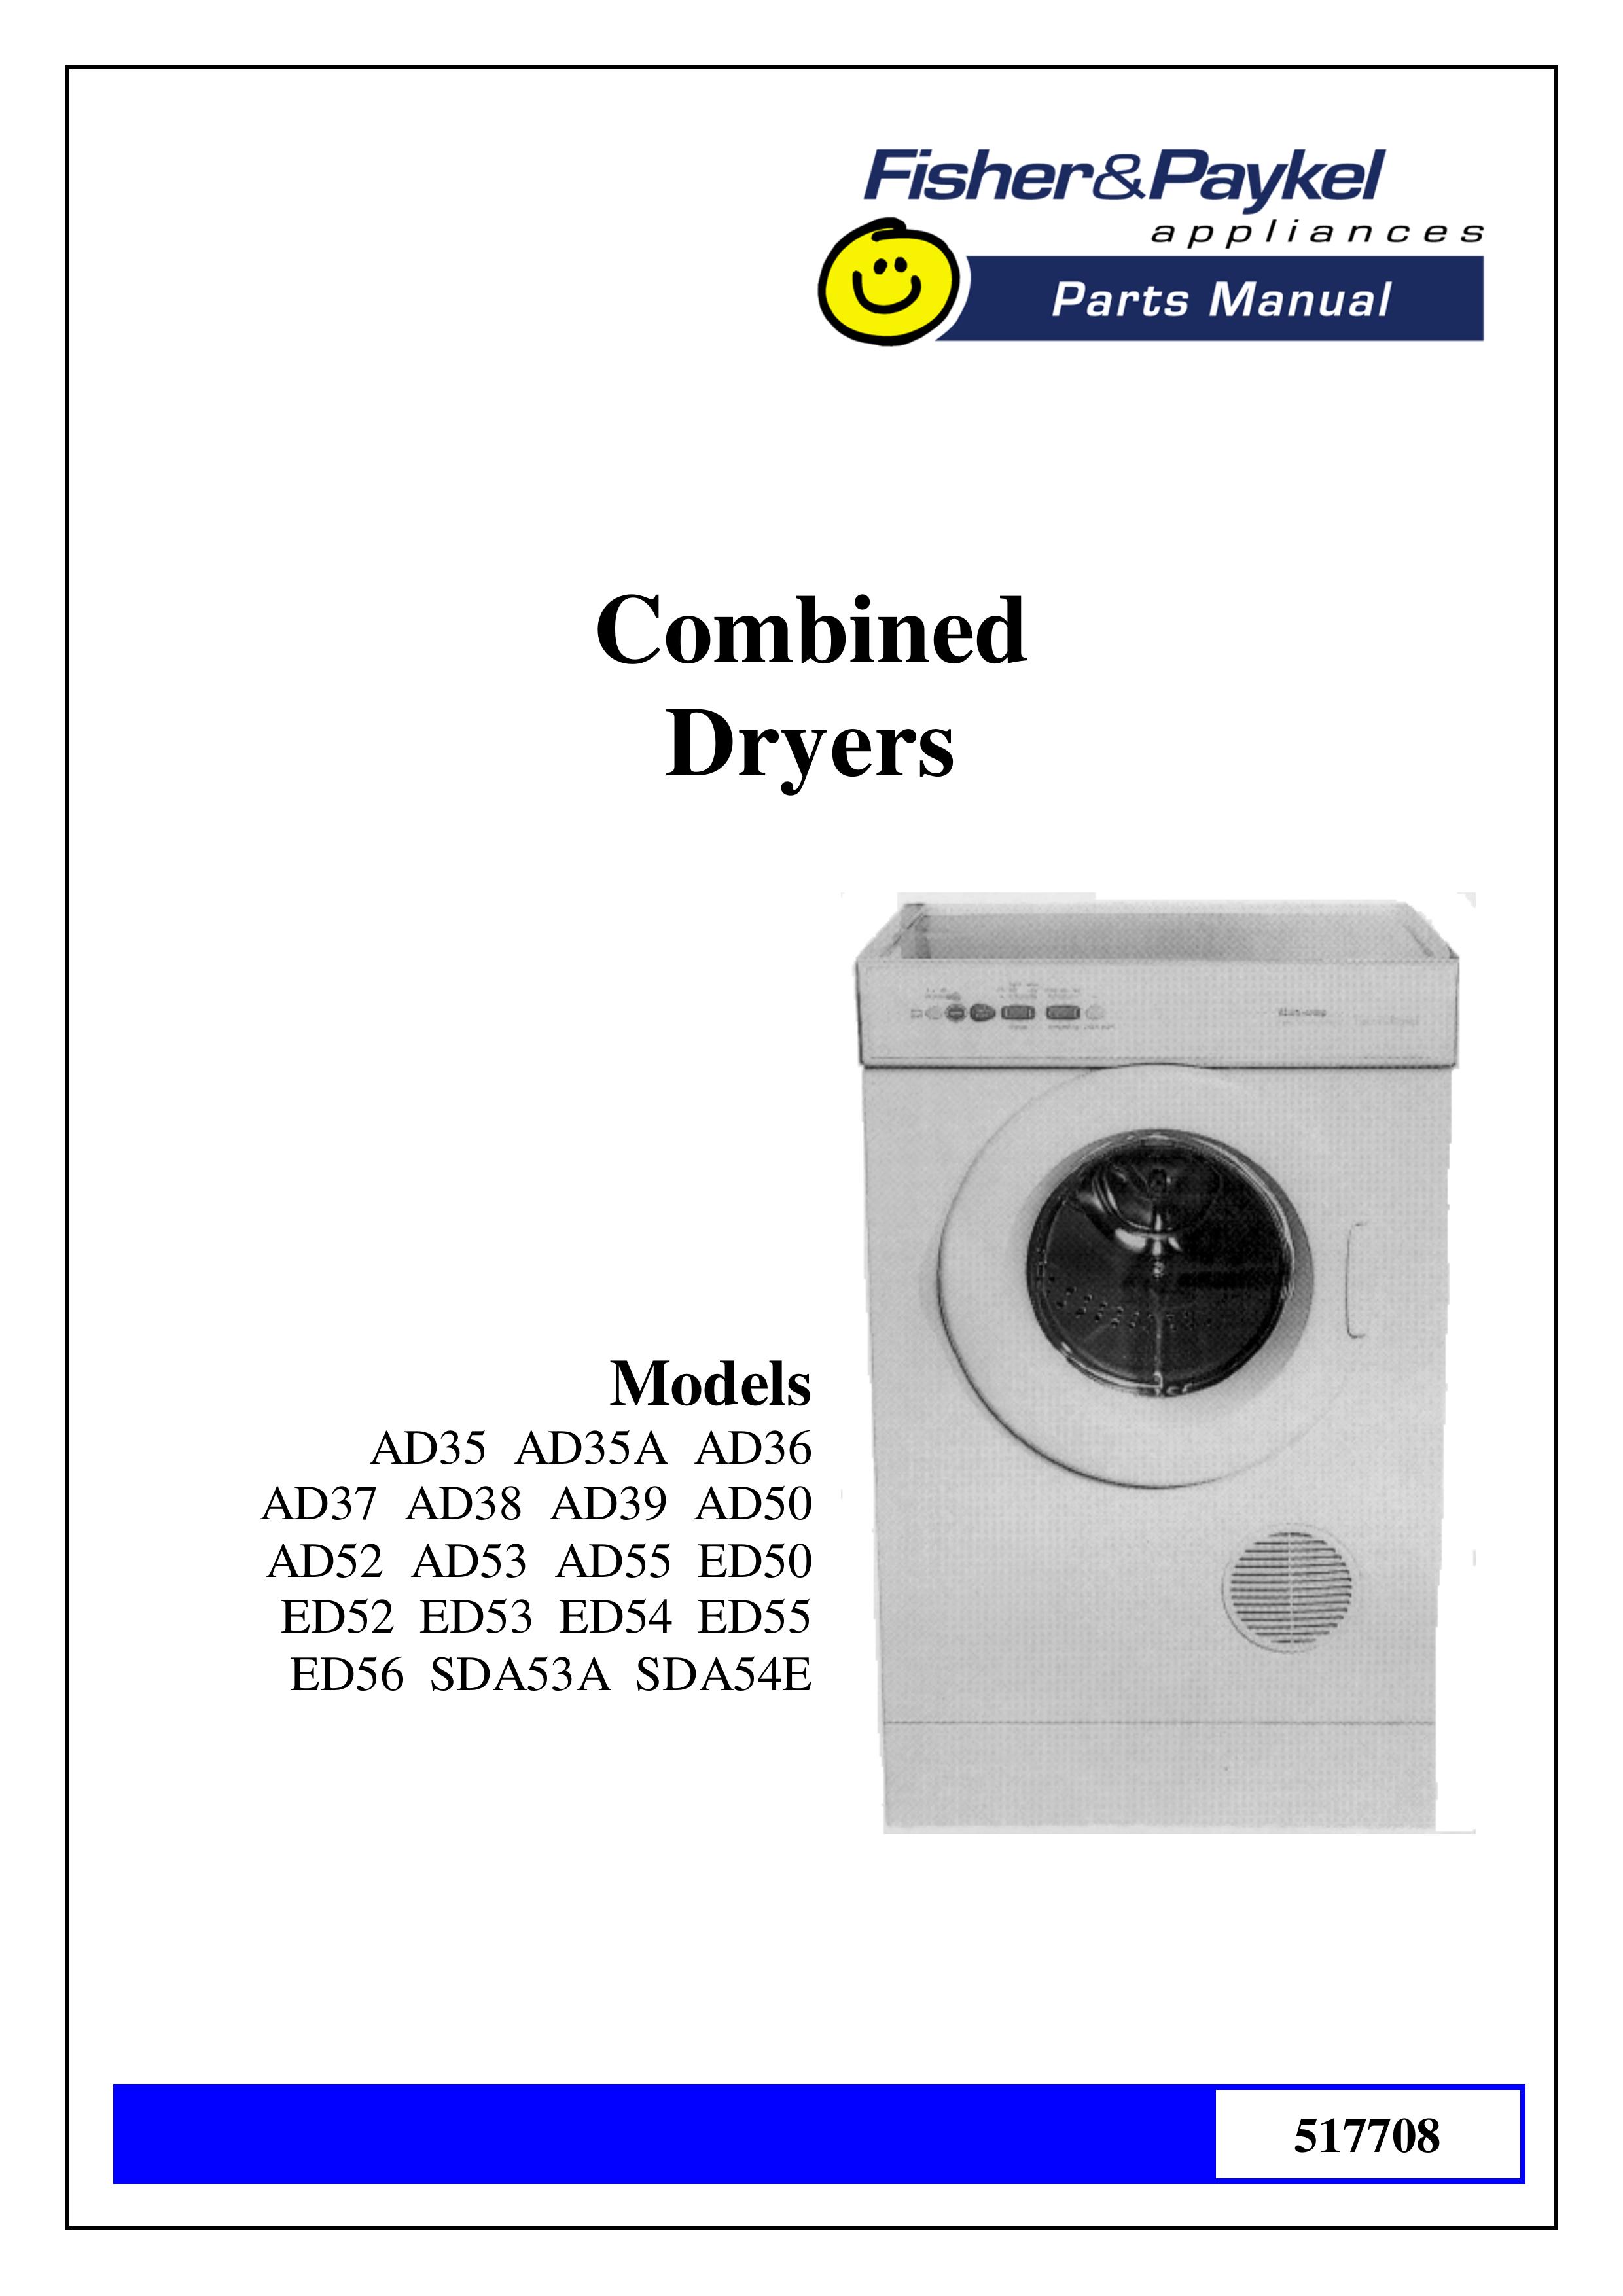 Fisher & Paykel ED55 Clothes Dryer User Manual